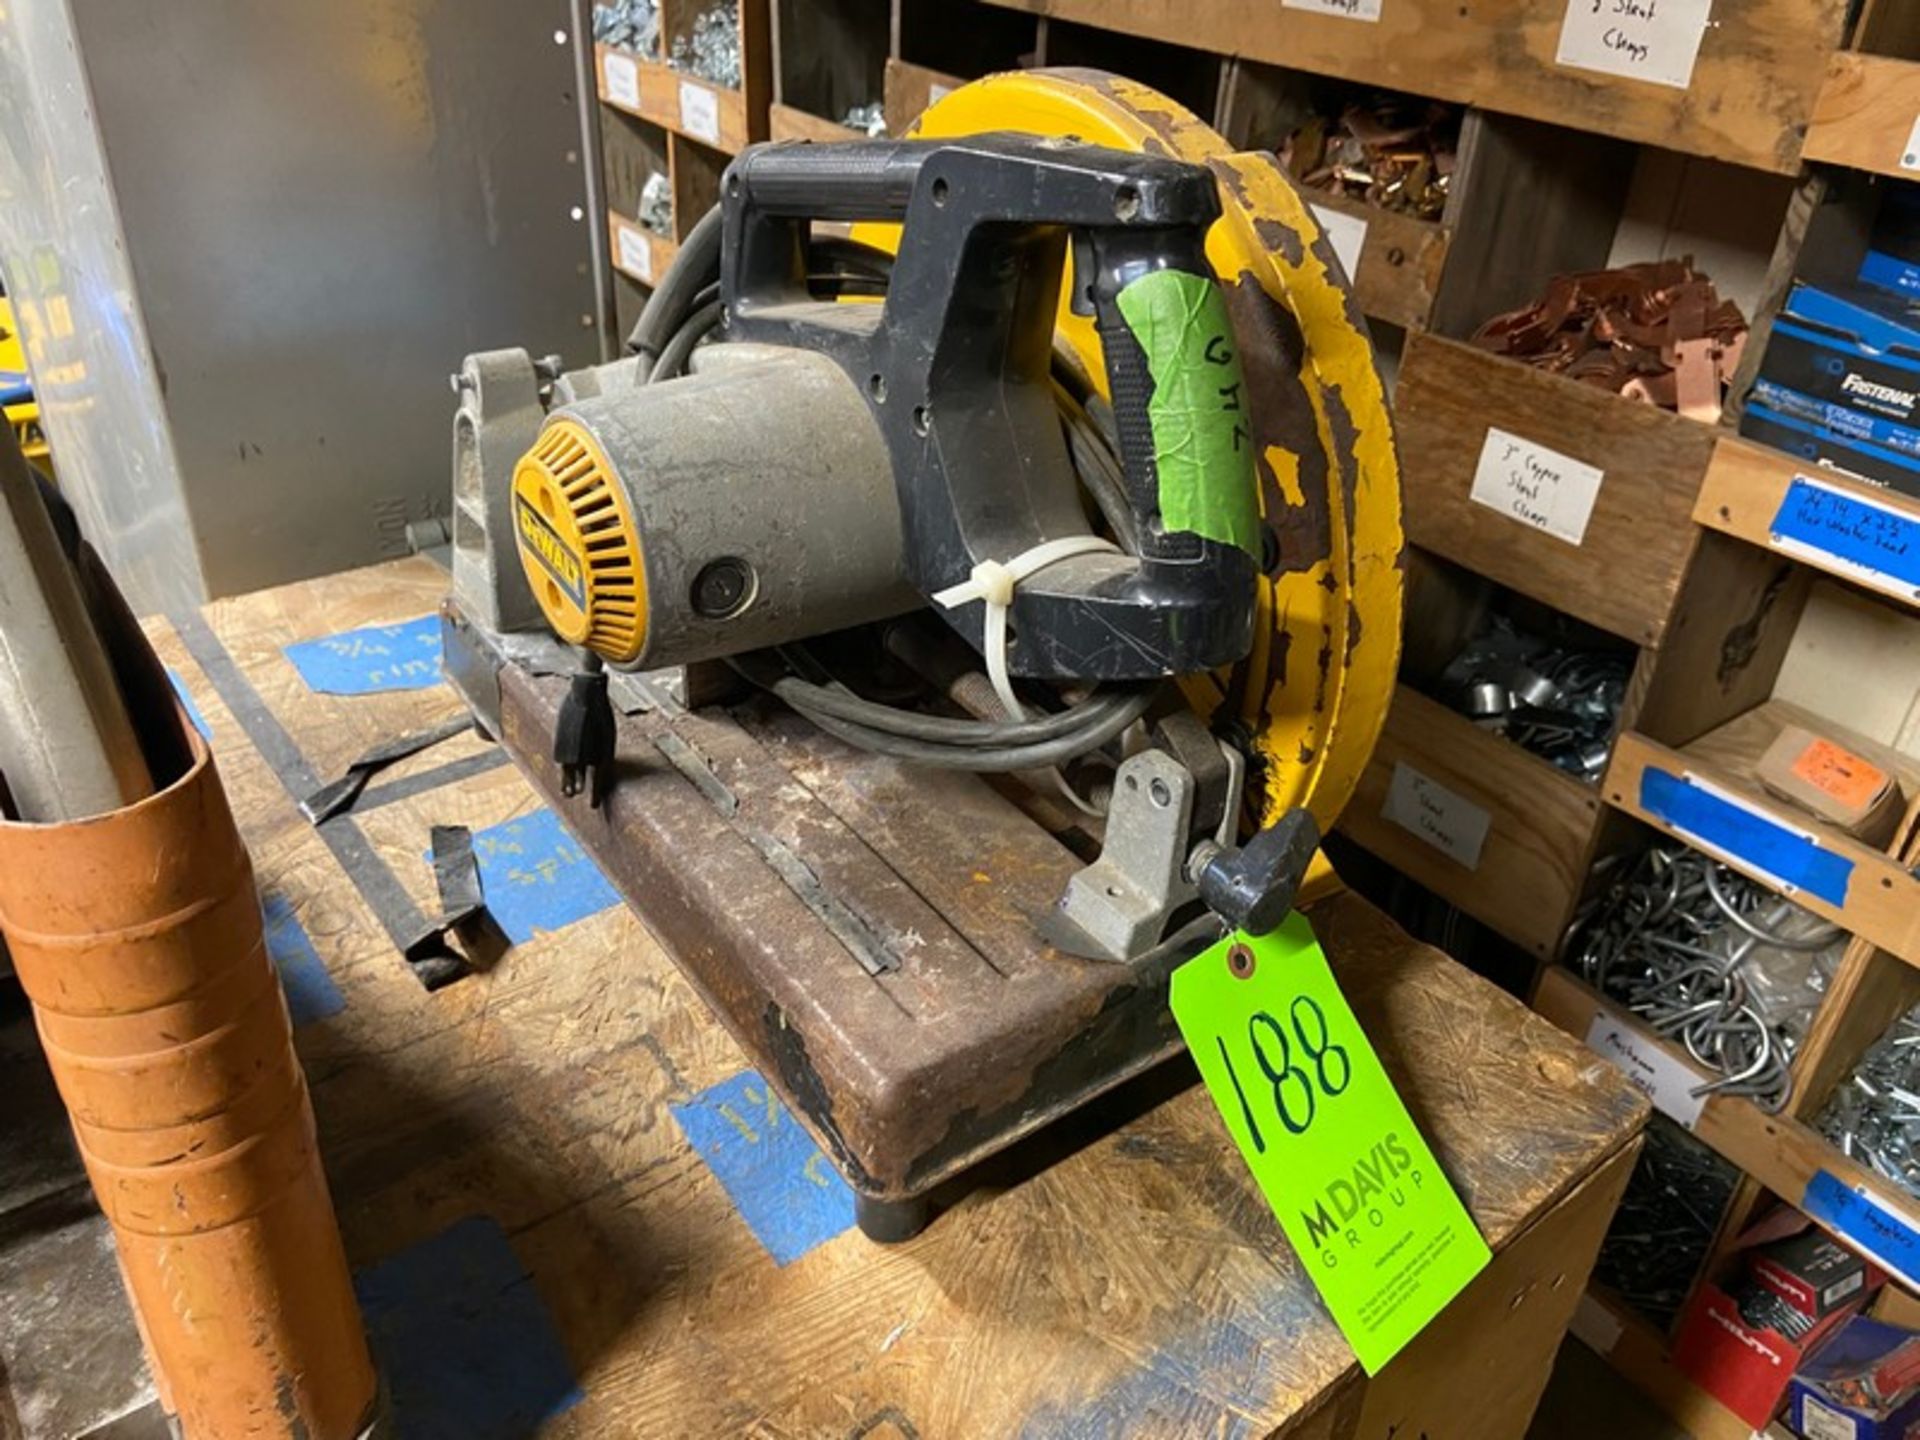 DeWalt 14” Abrasive Chop Saw, S/N 78523, 120 Volts (NOTE: No Blade) (LOCATED IN MONROEVILLE, PA)(